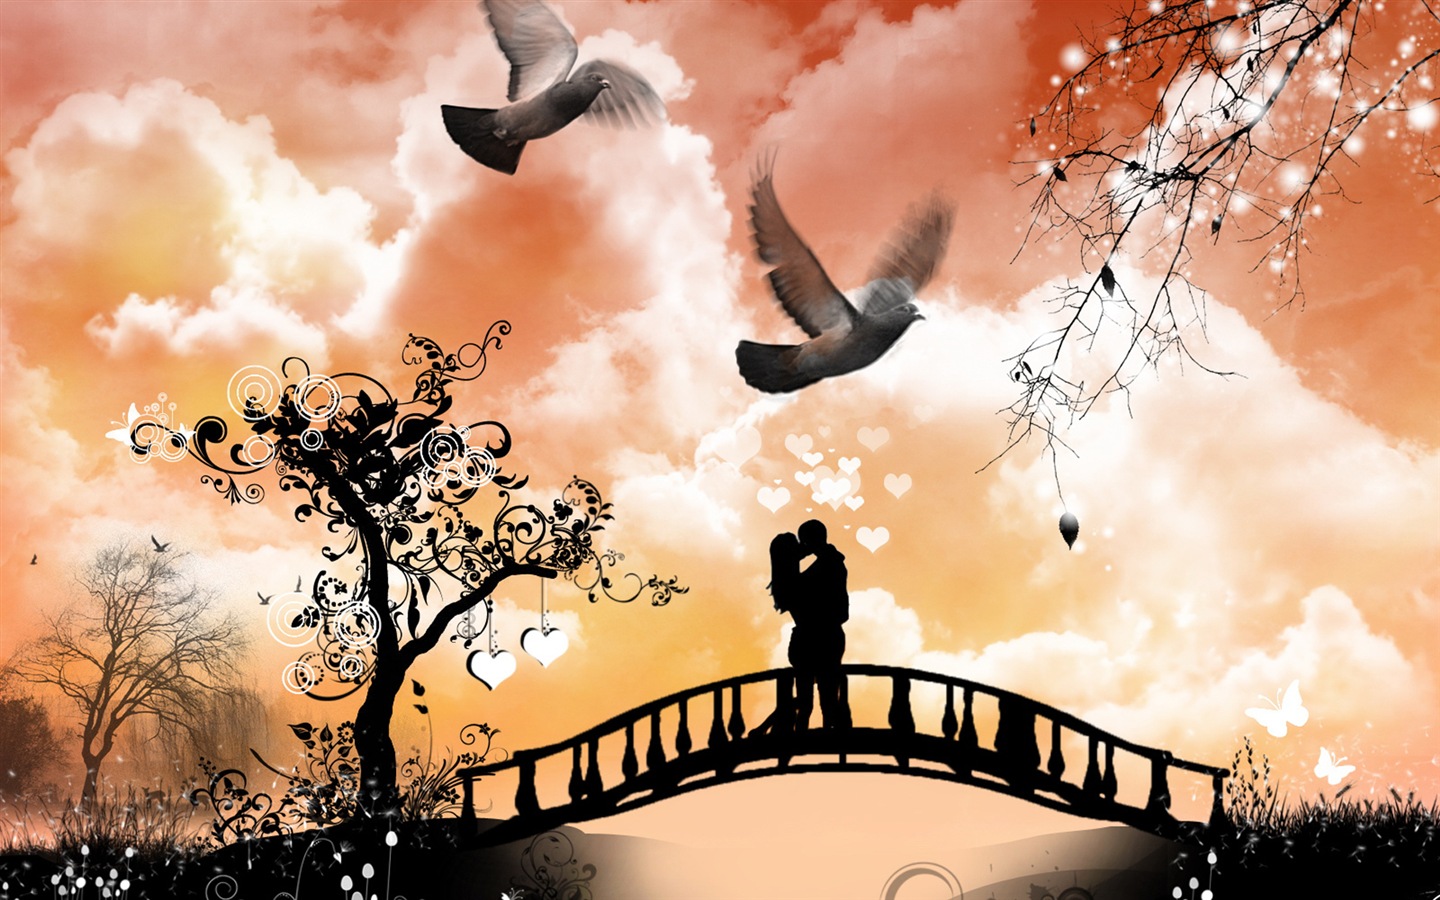 Warm and romantic Valentine's Day HD wallpapers #20 - 1440x900